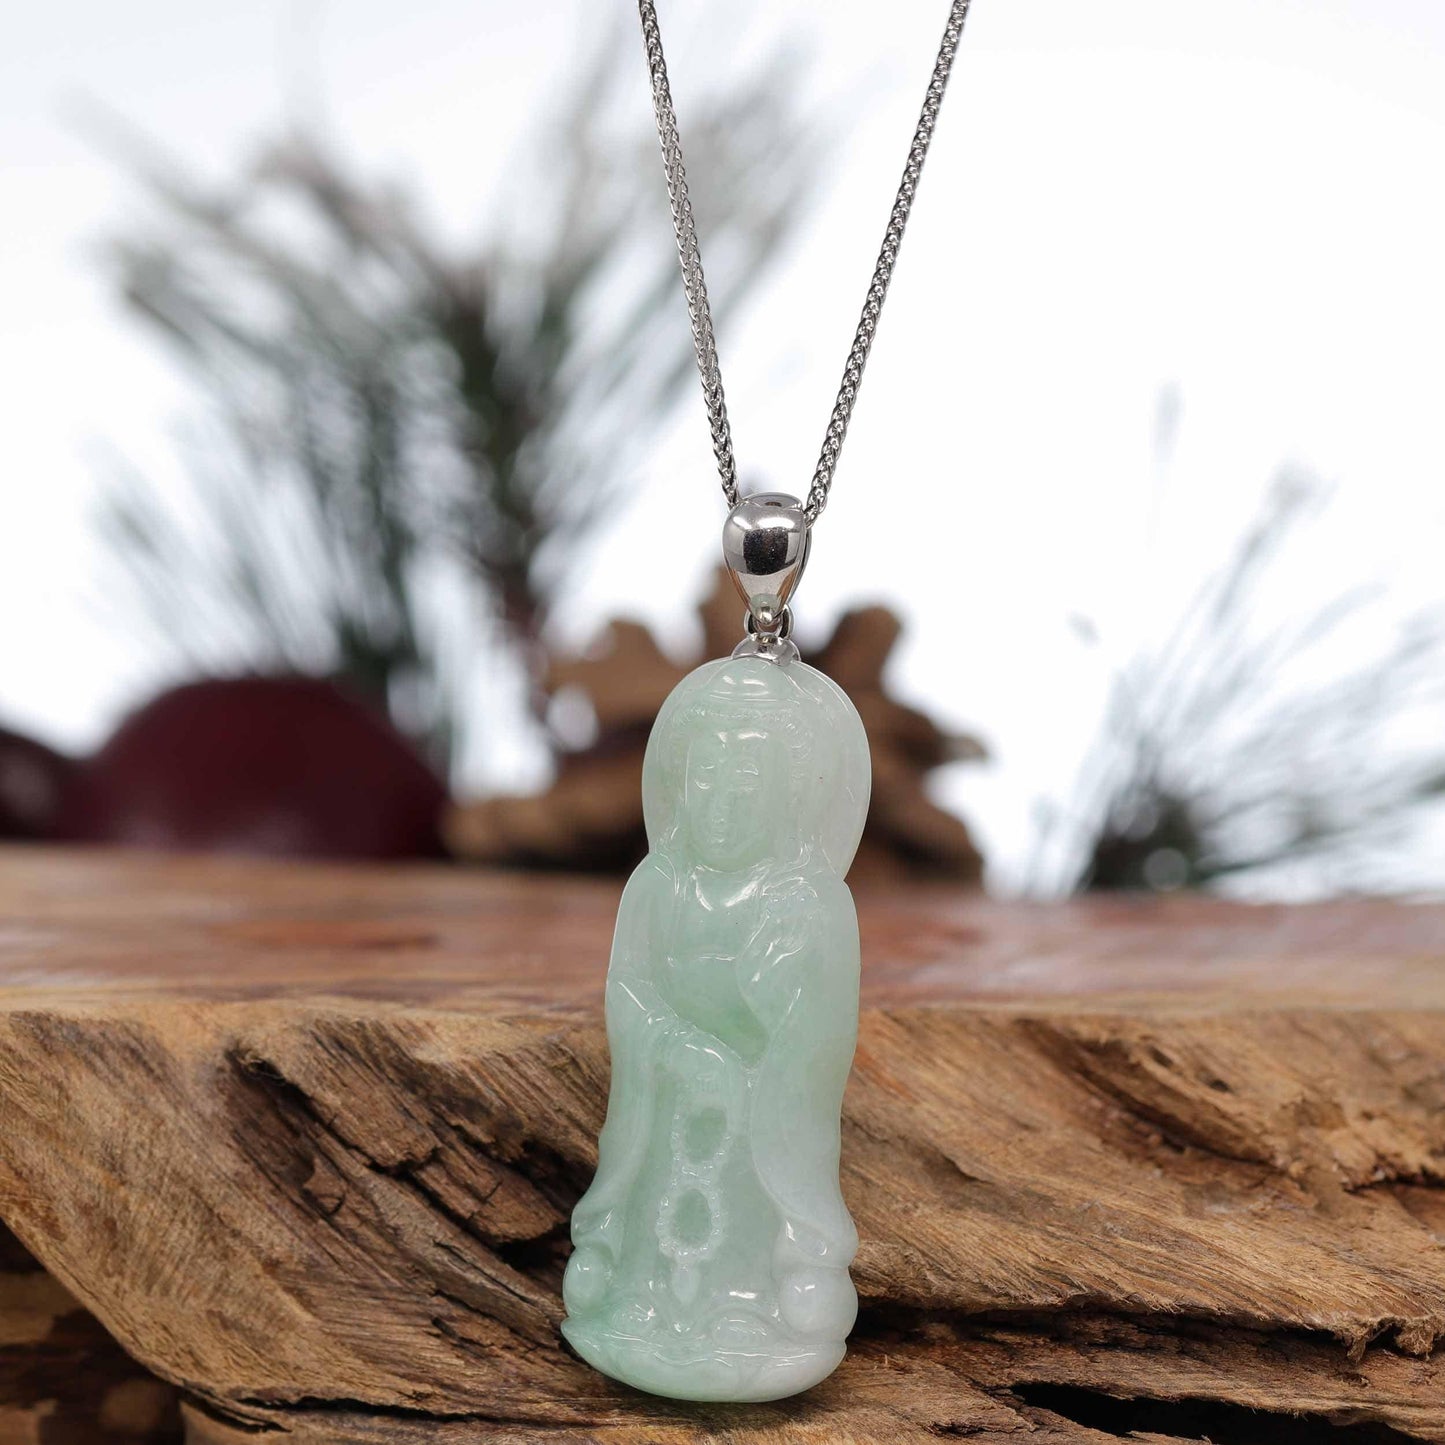 Genuine Burmese Jadeite Jade Green Guanyin Pendant Necklace With Silver Bail